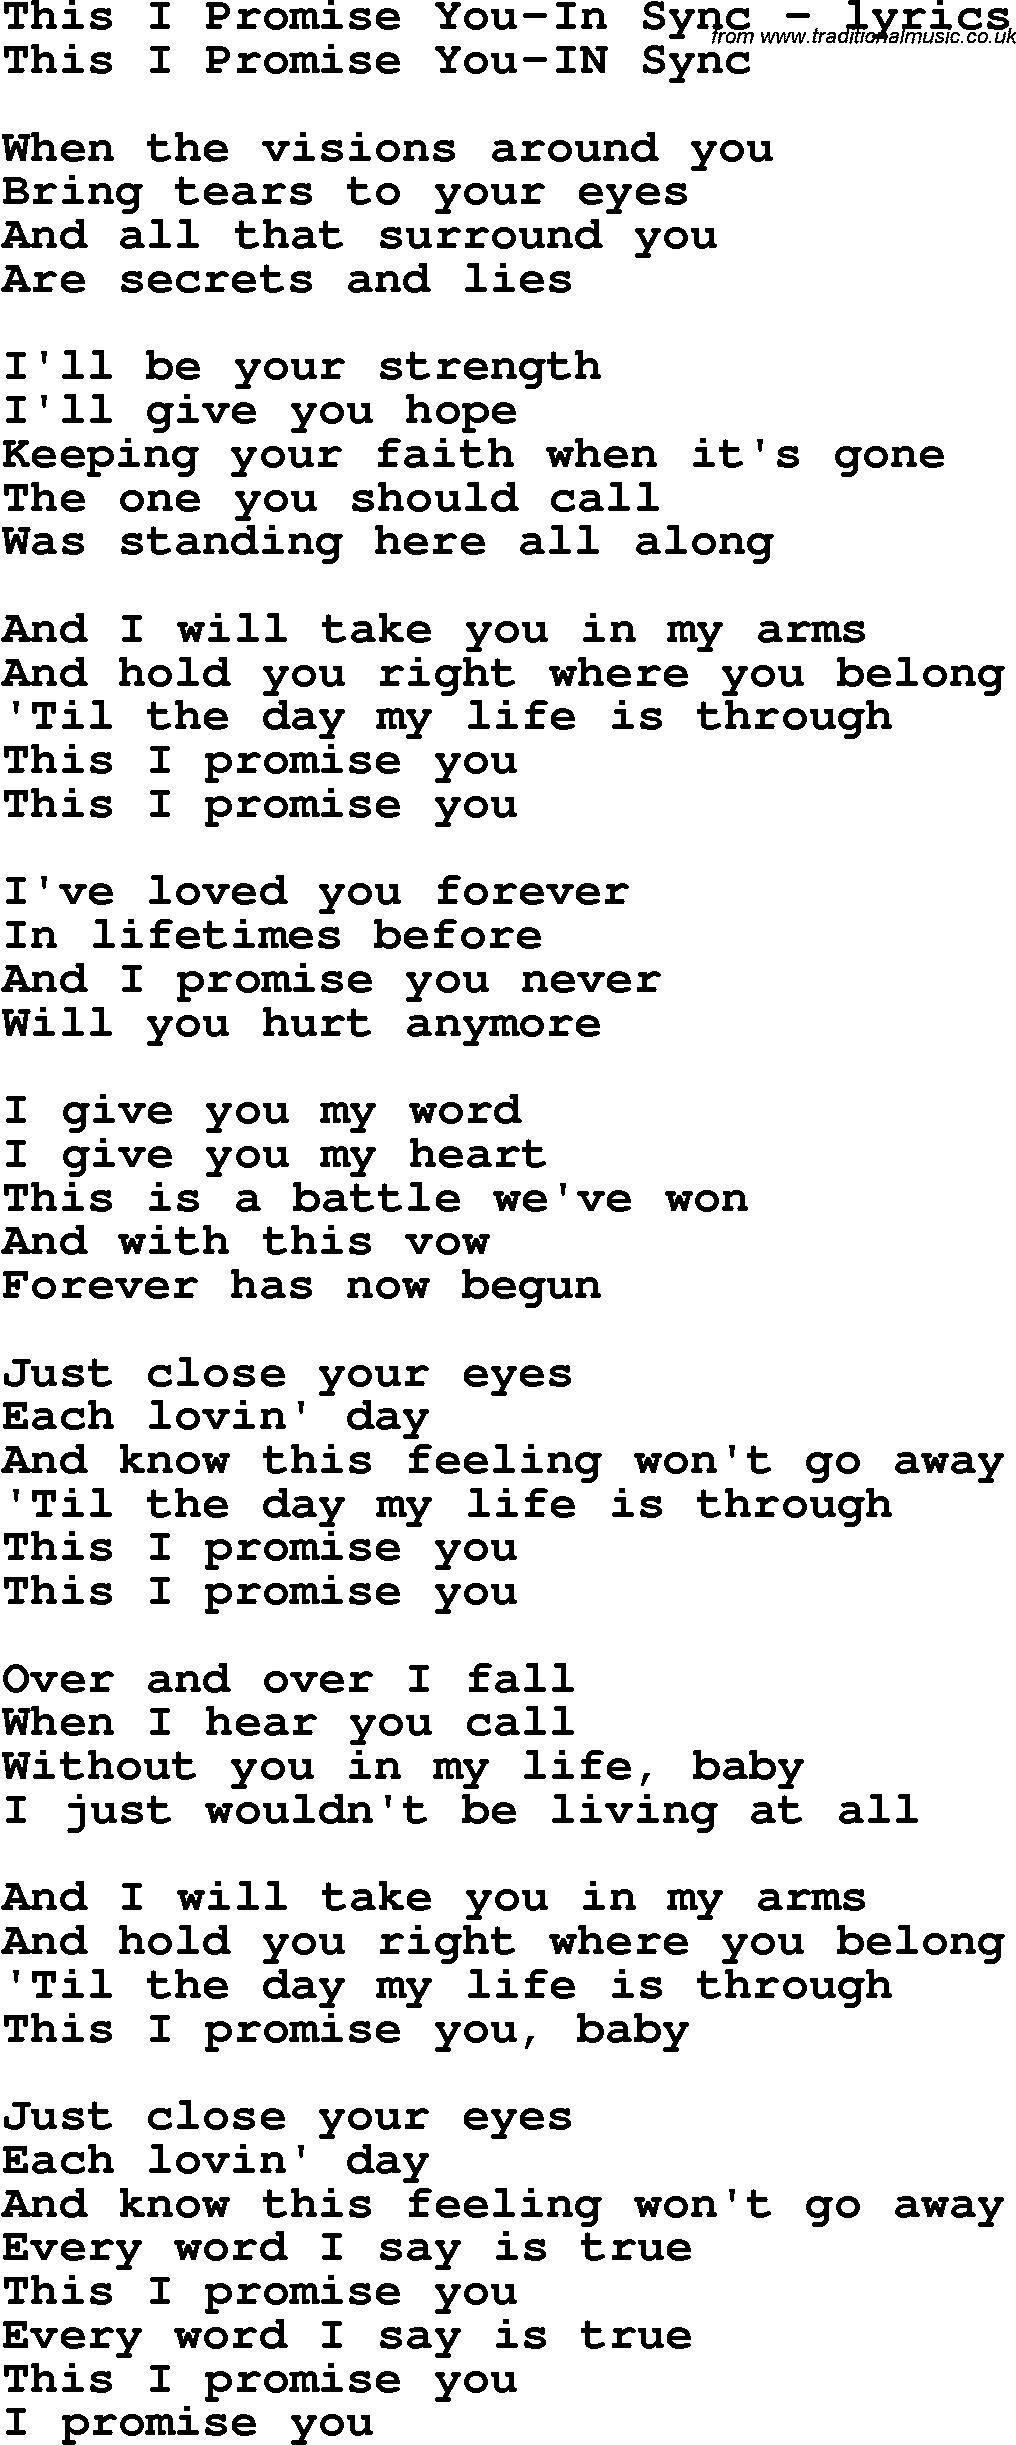 Love Song Lyrics for: This I Promise You-In Sync